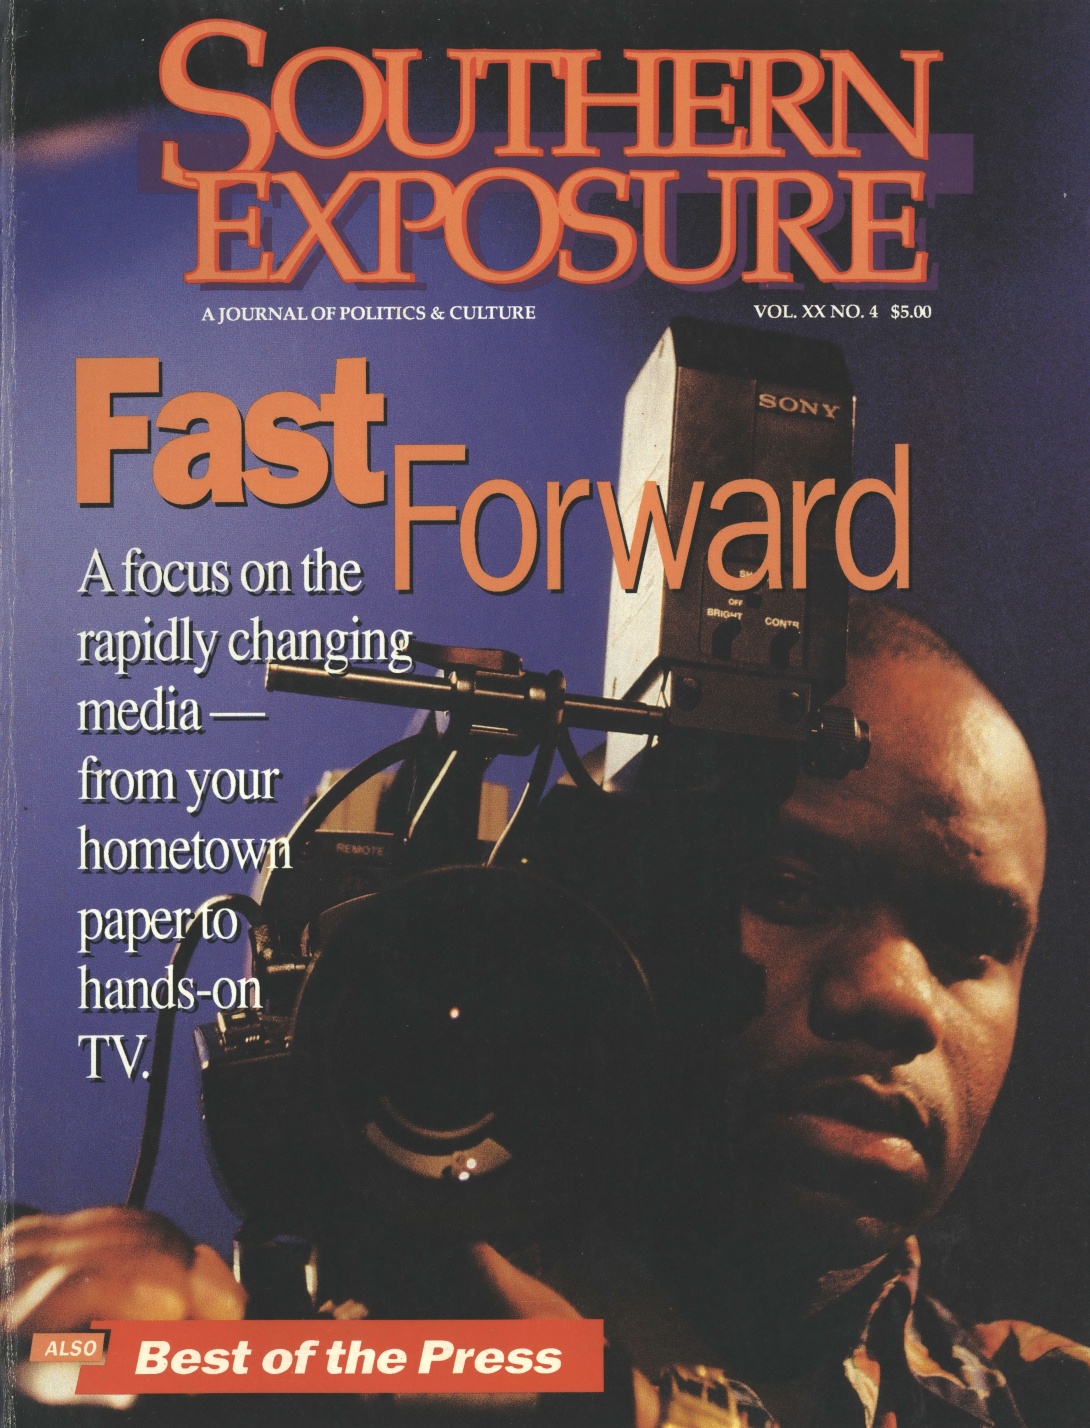 Magazine cover with photo of man with camera, reading "Fast Forward" 